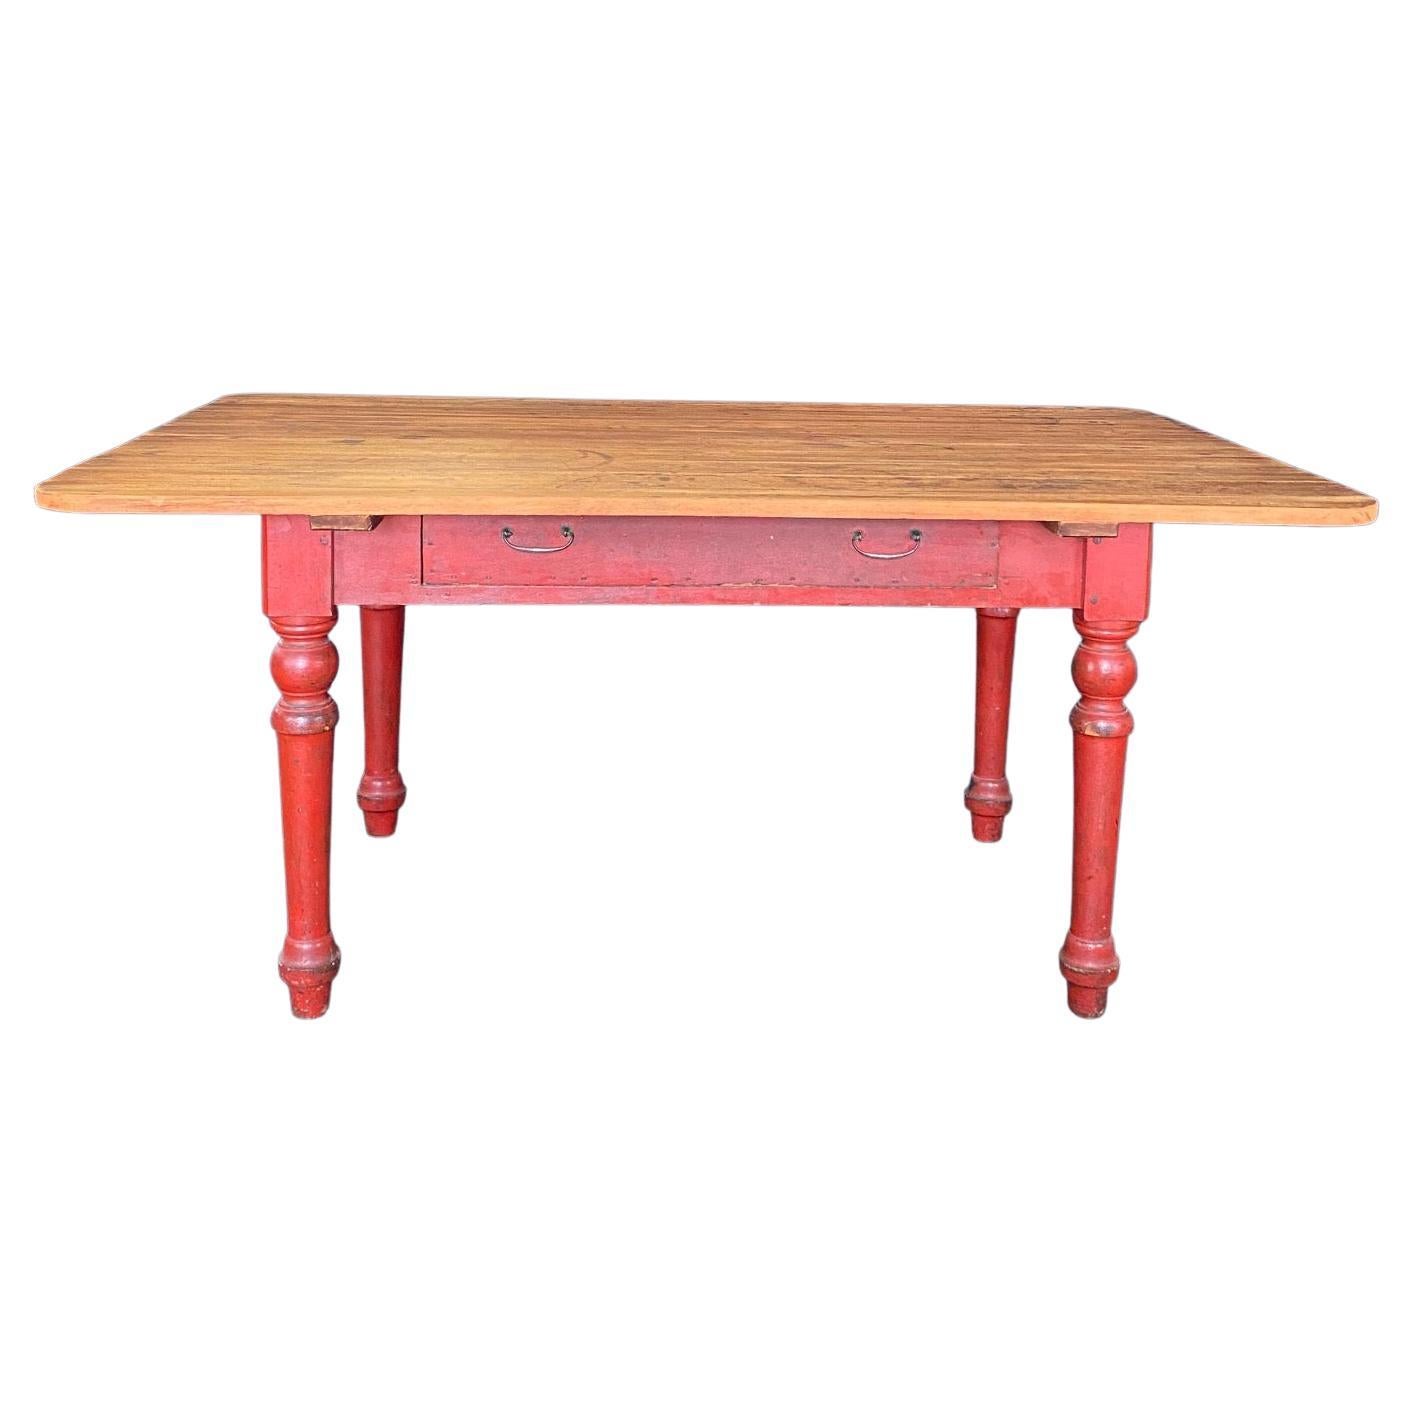 Fabulous Red Painted 19th Century Rustic Pine Farmhouse Dining Table or Desk For Sale